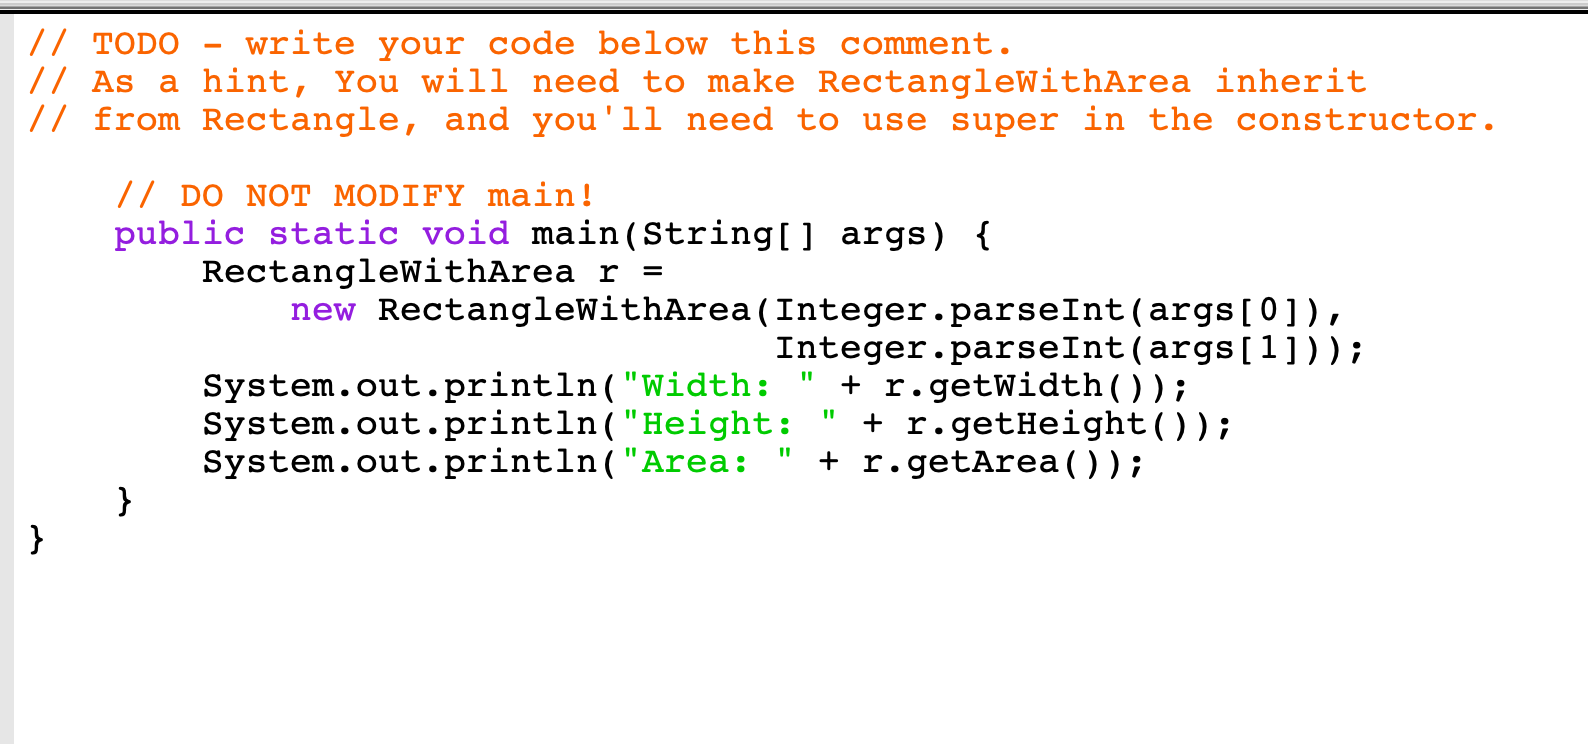 // TODO - write your code below this comment. // As a hint, You will need to make RectangleWithArea inherit // from Rectangle